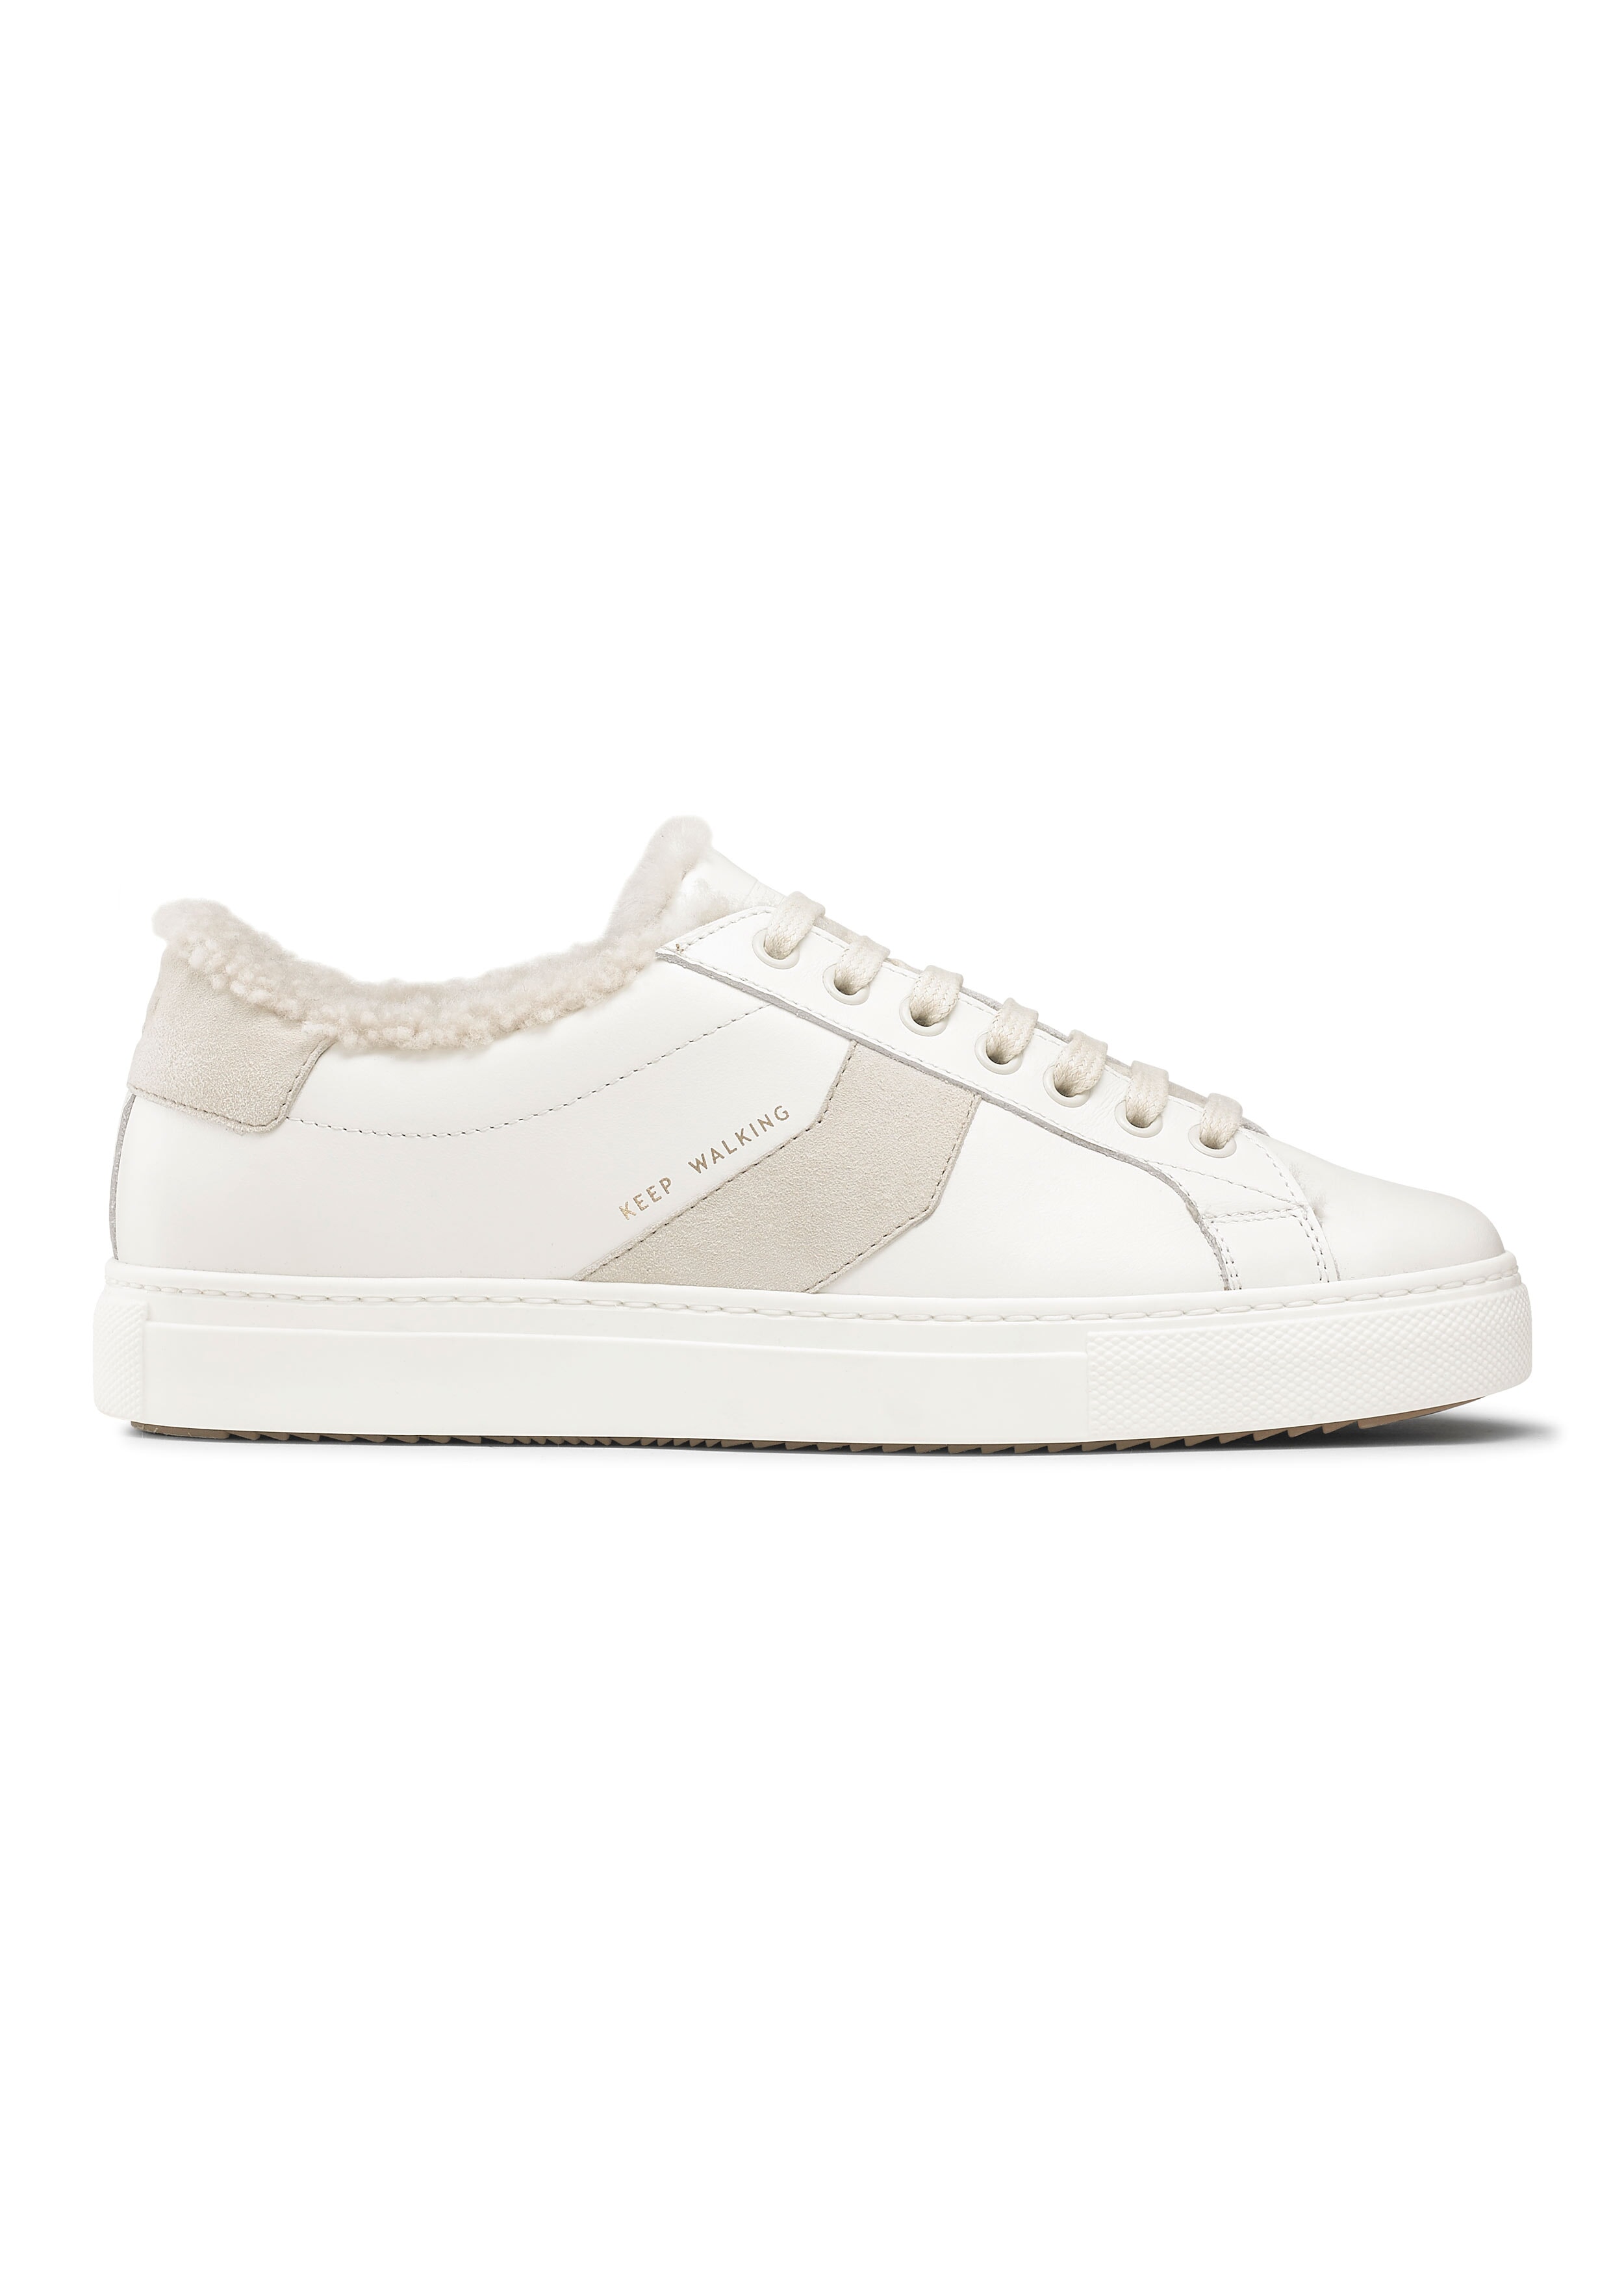 Winter Shearling-Lined Leather Trainer Pale Neutral